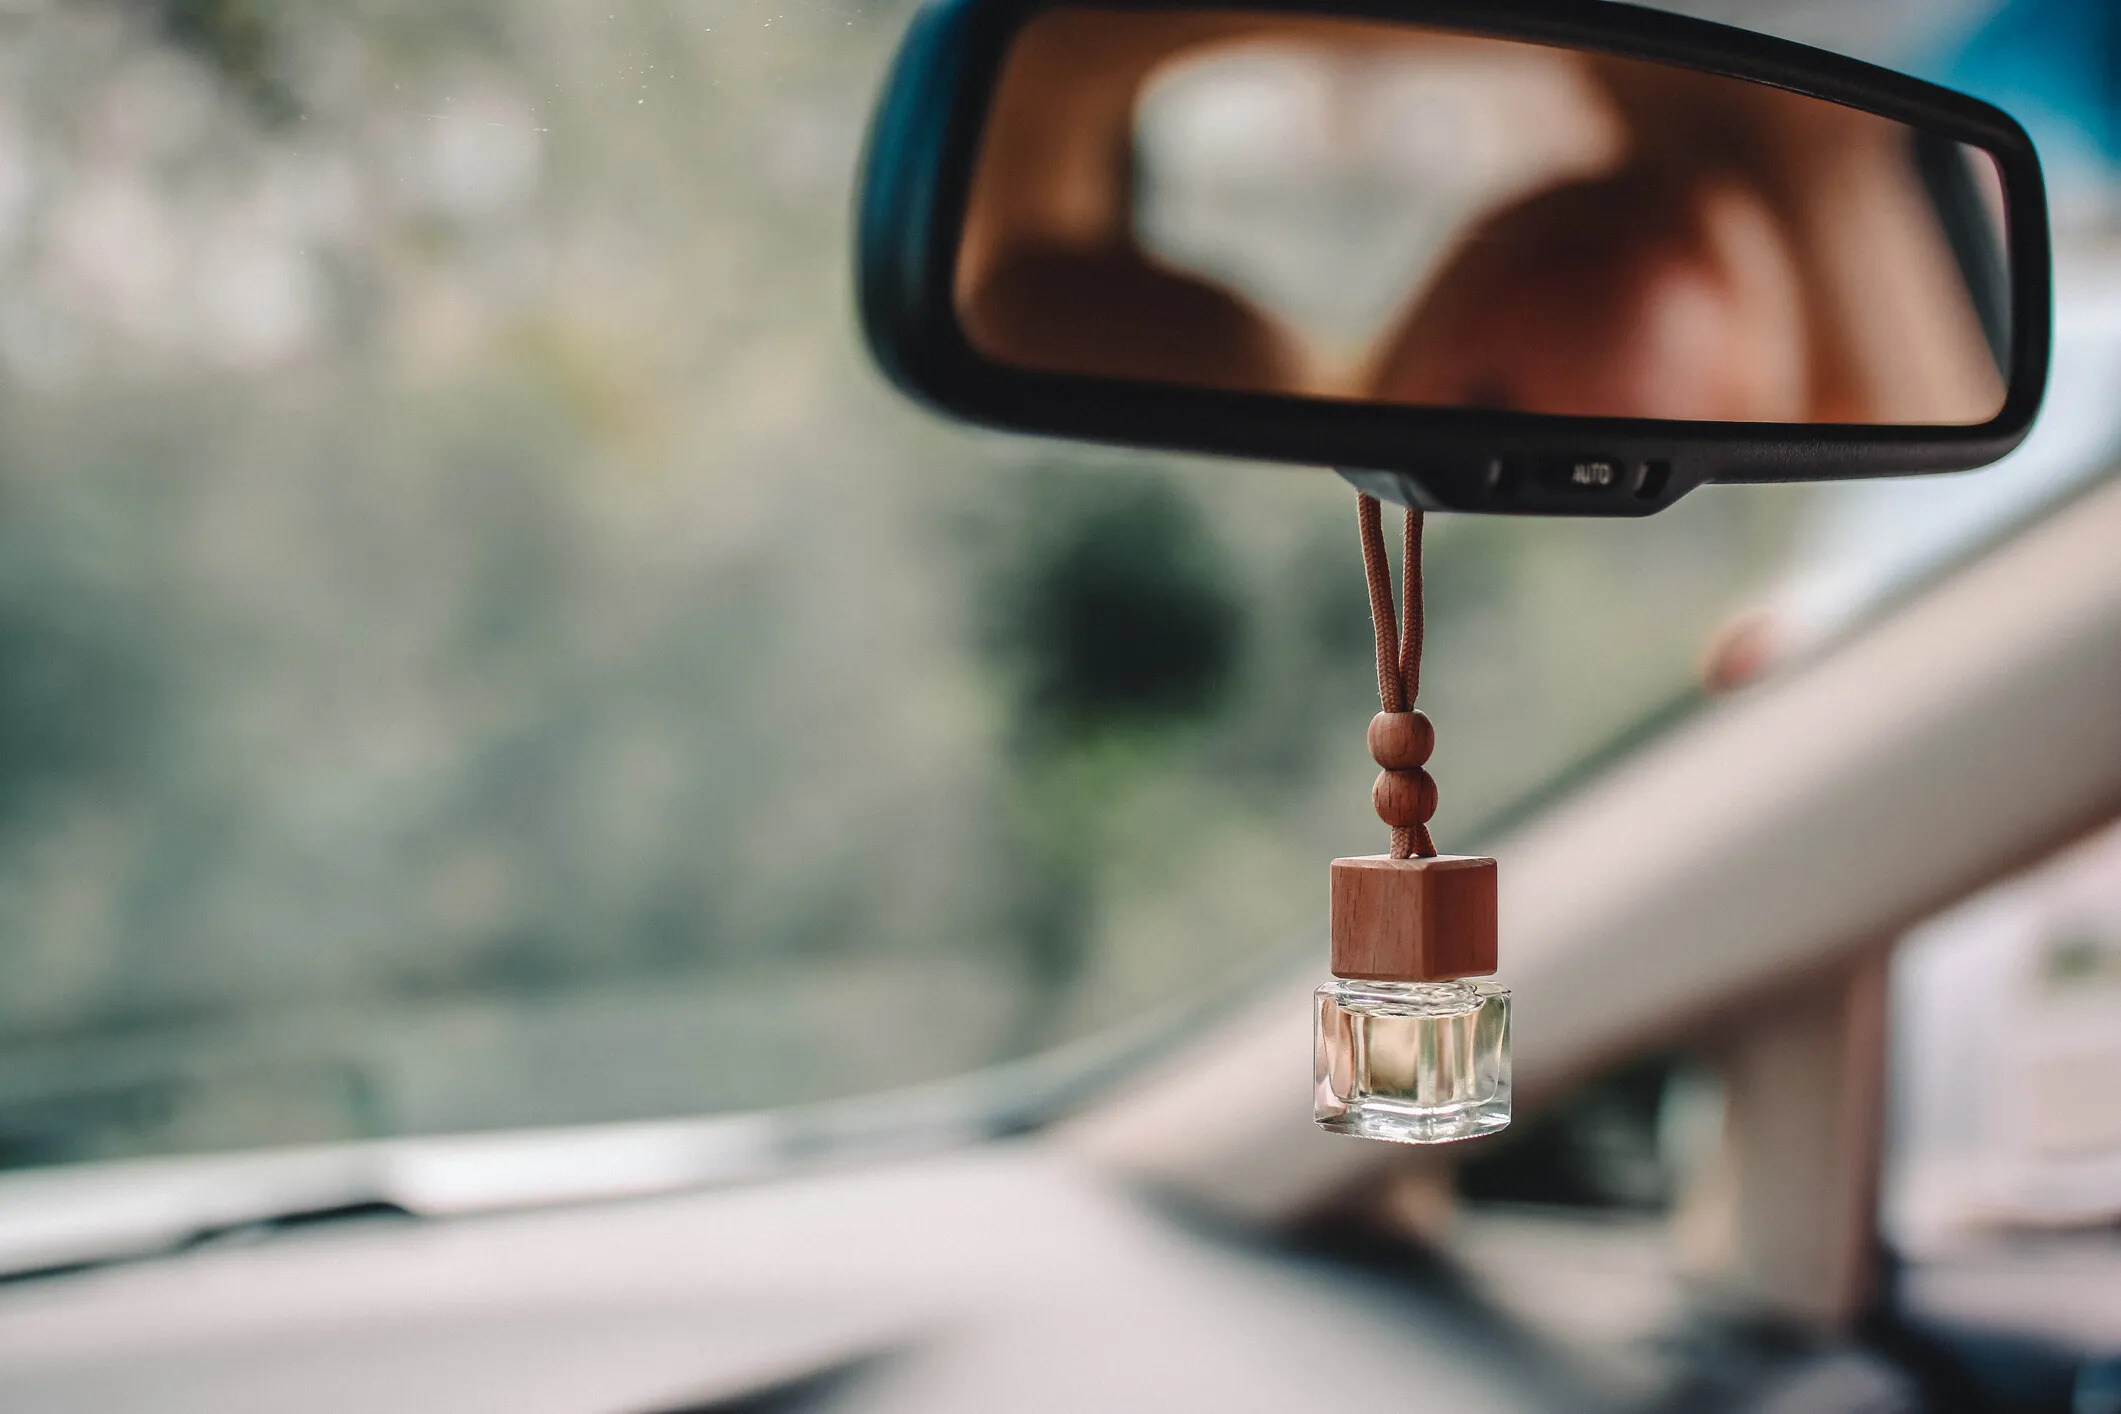 How To Hang Things On Rearview Mirror